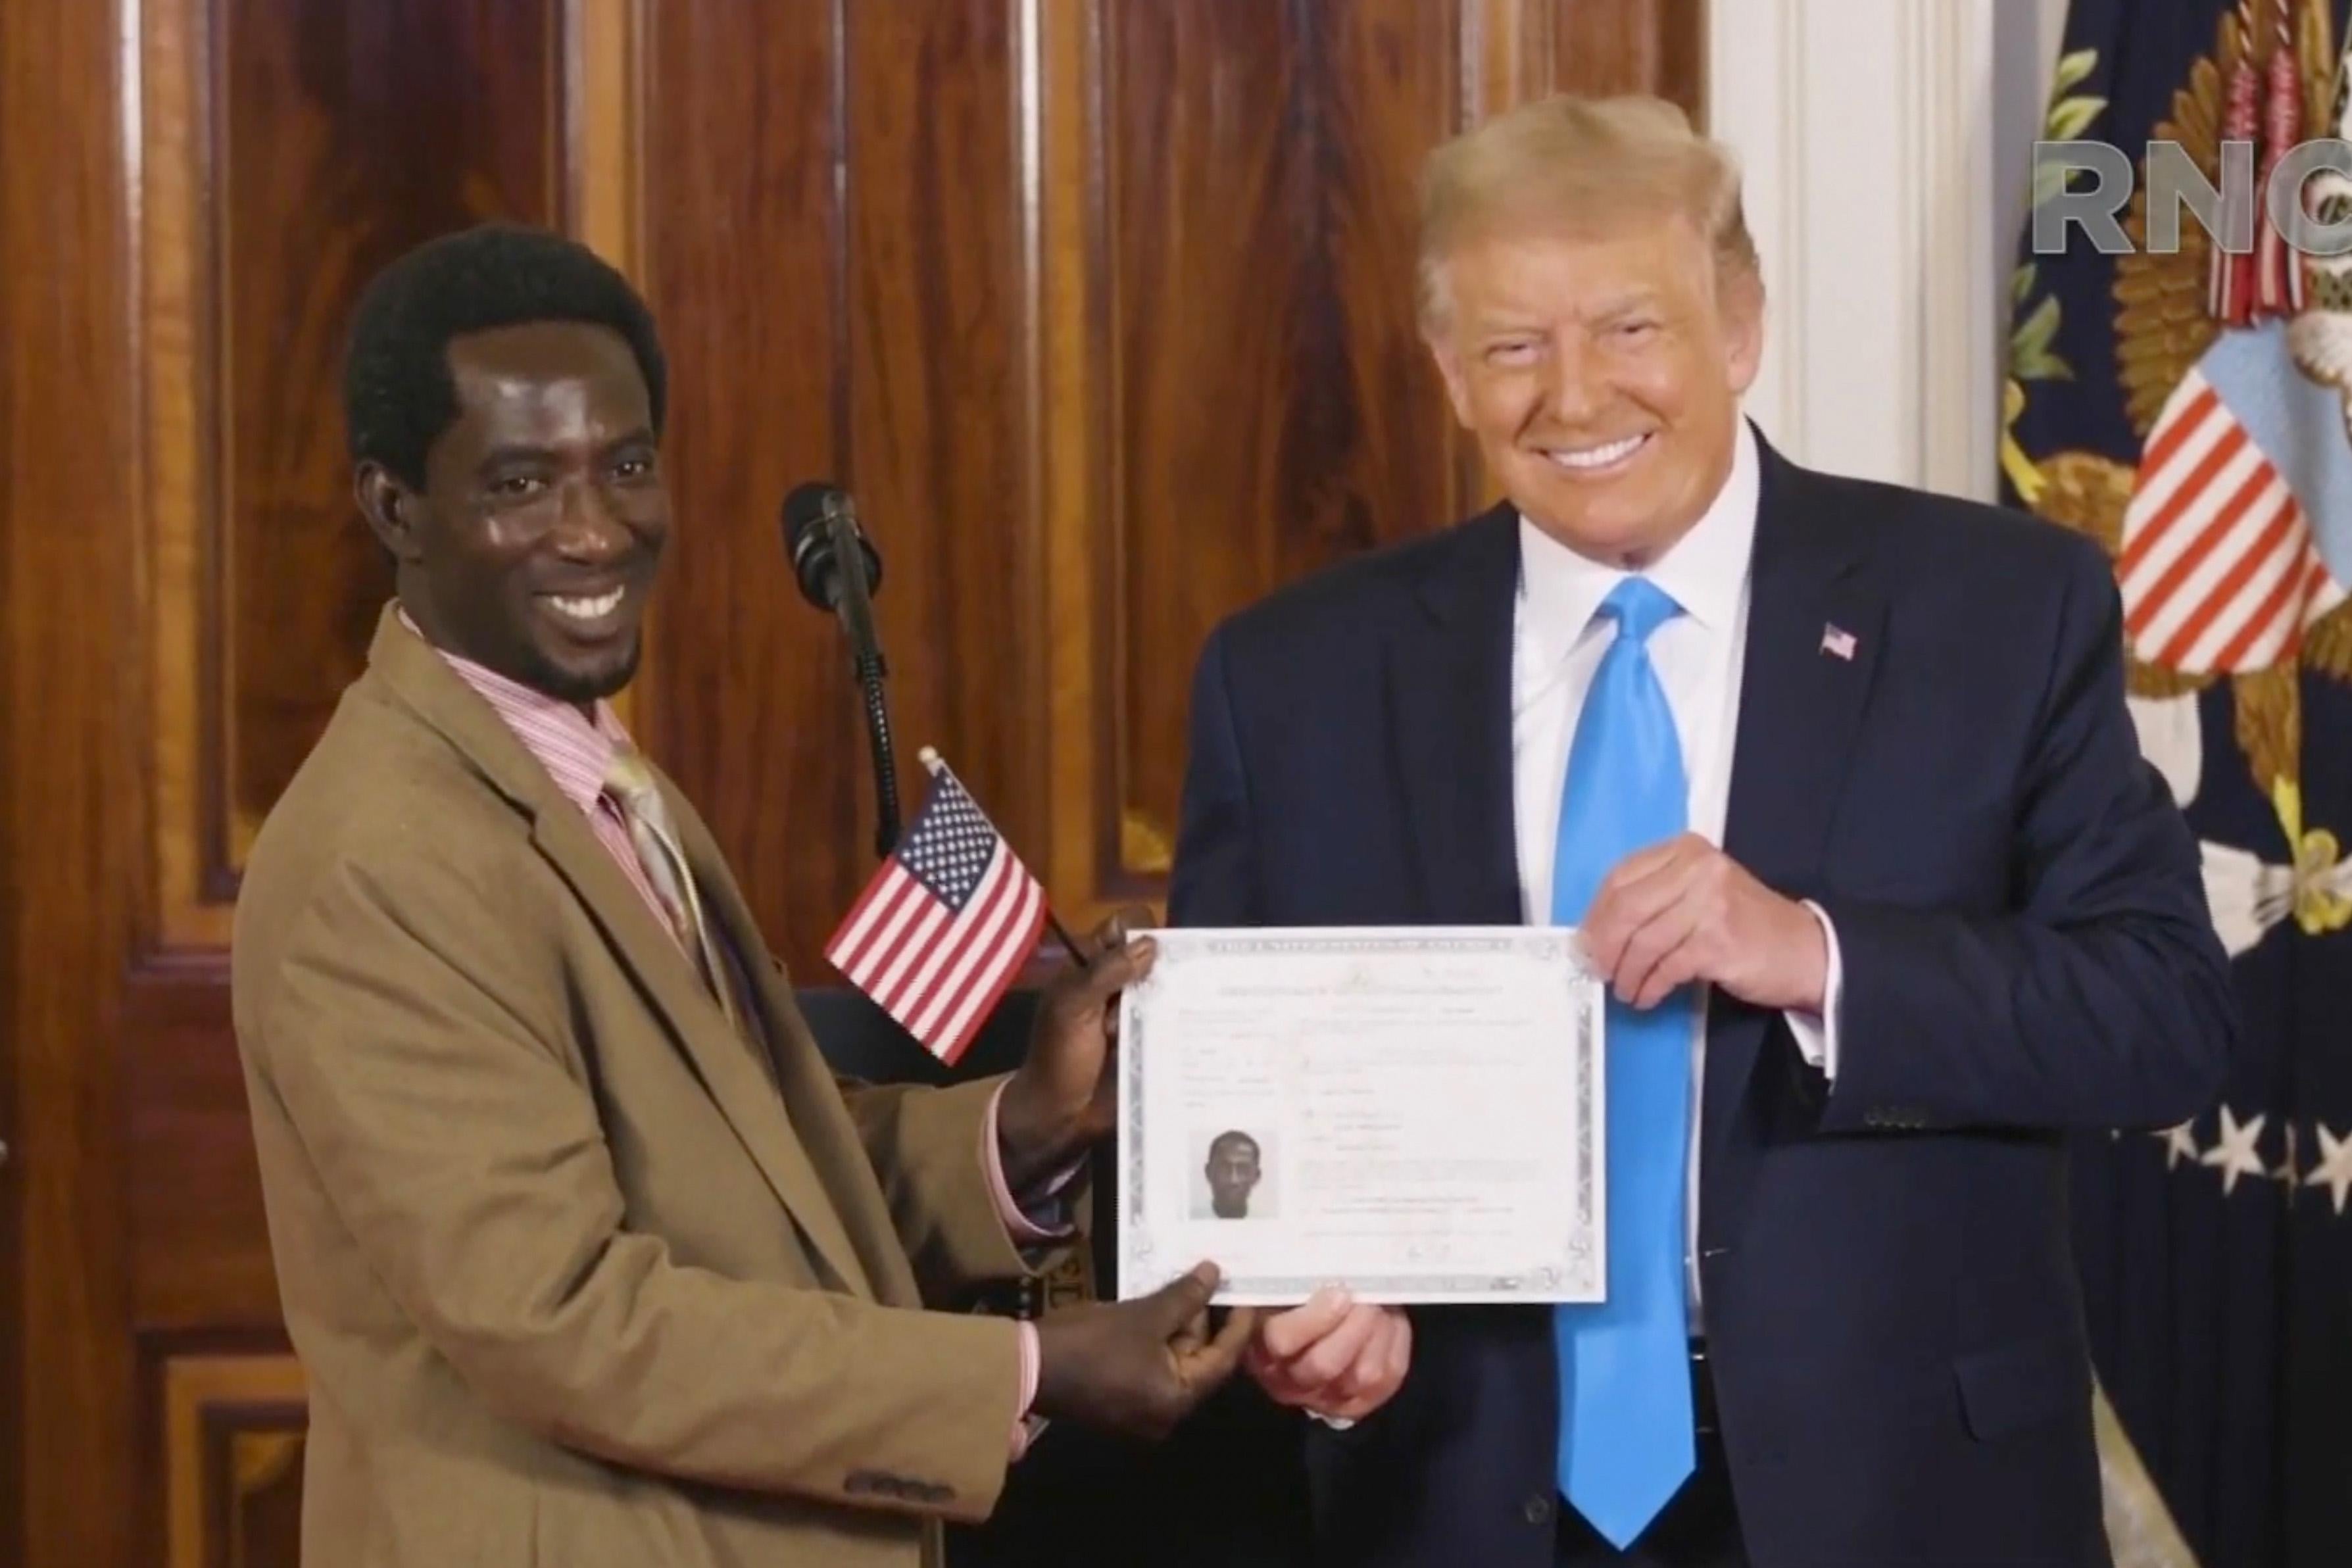 Trump posing with one of the new American citizens during the naturalization ceremony used at the Republican convention.